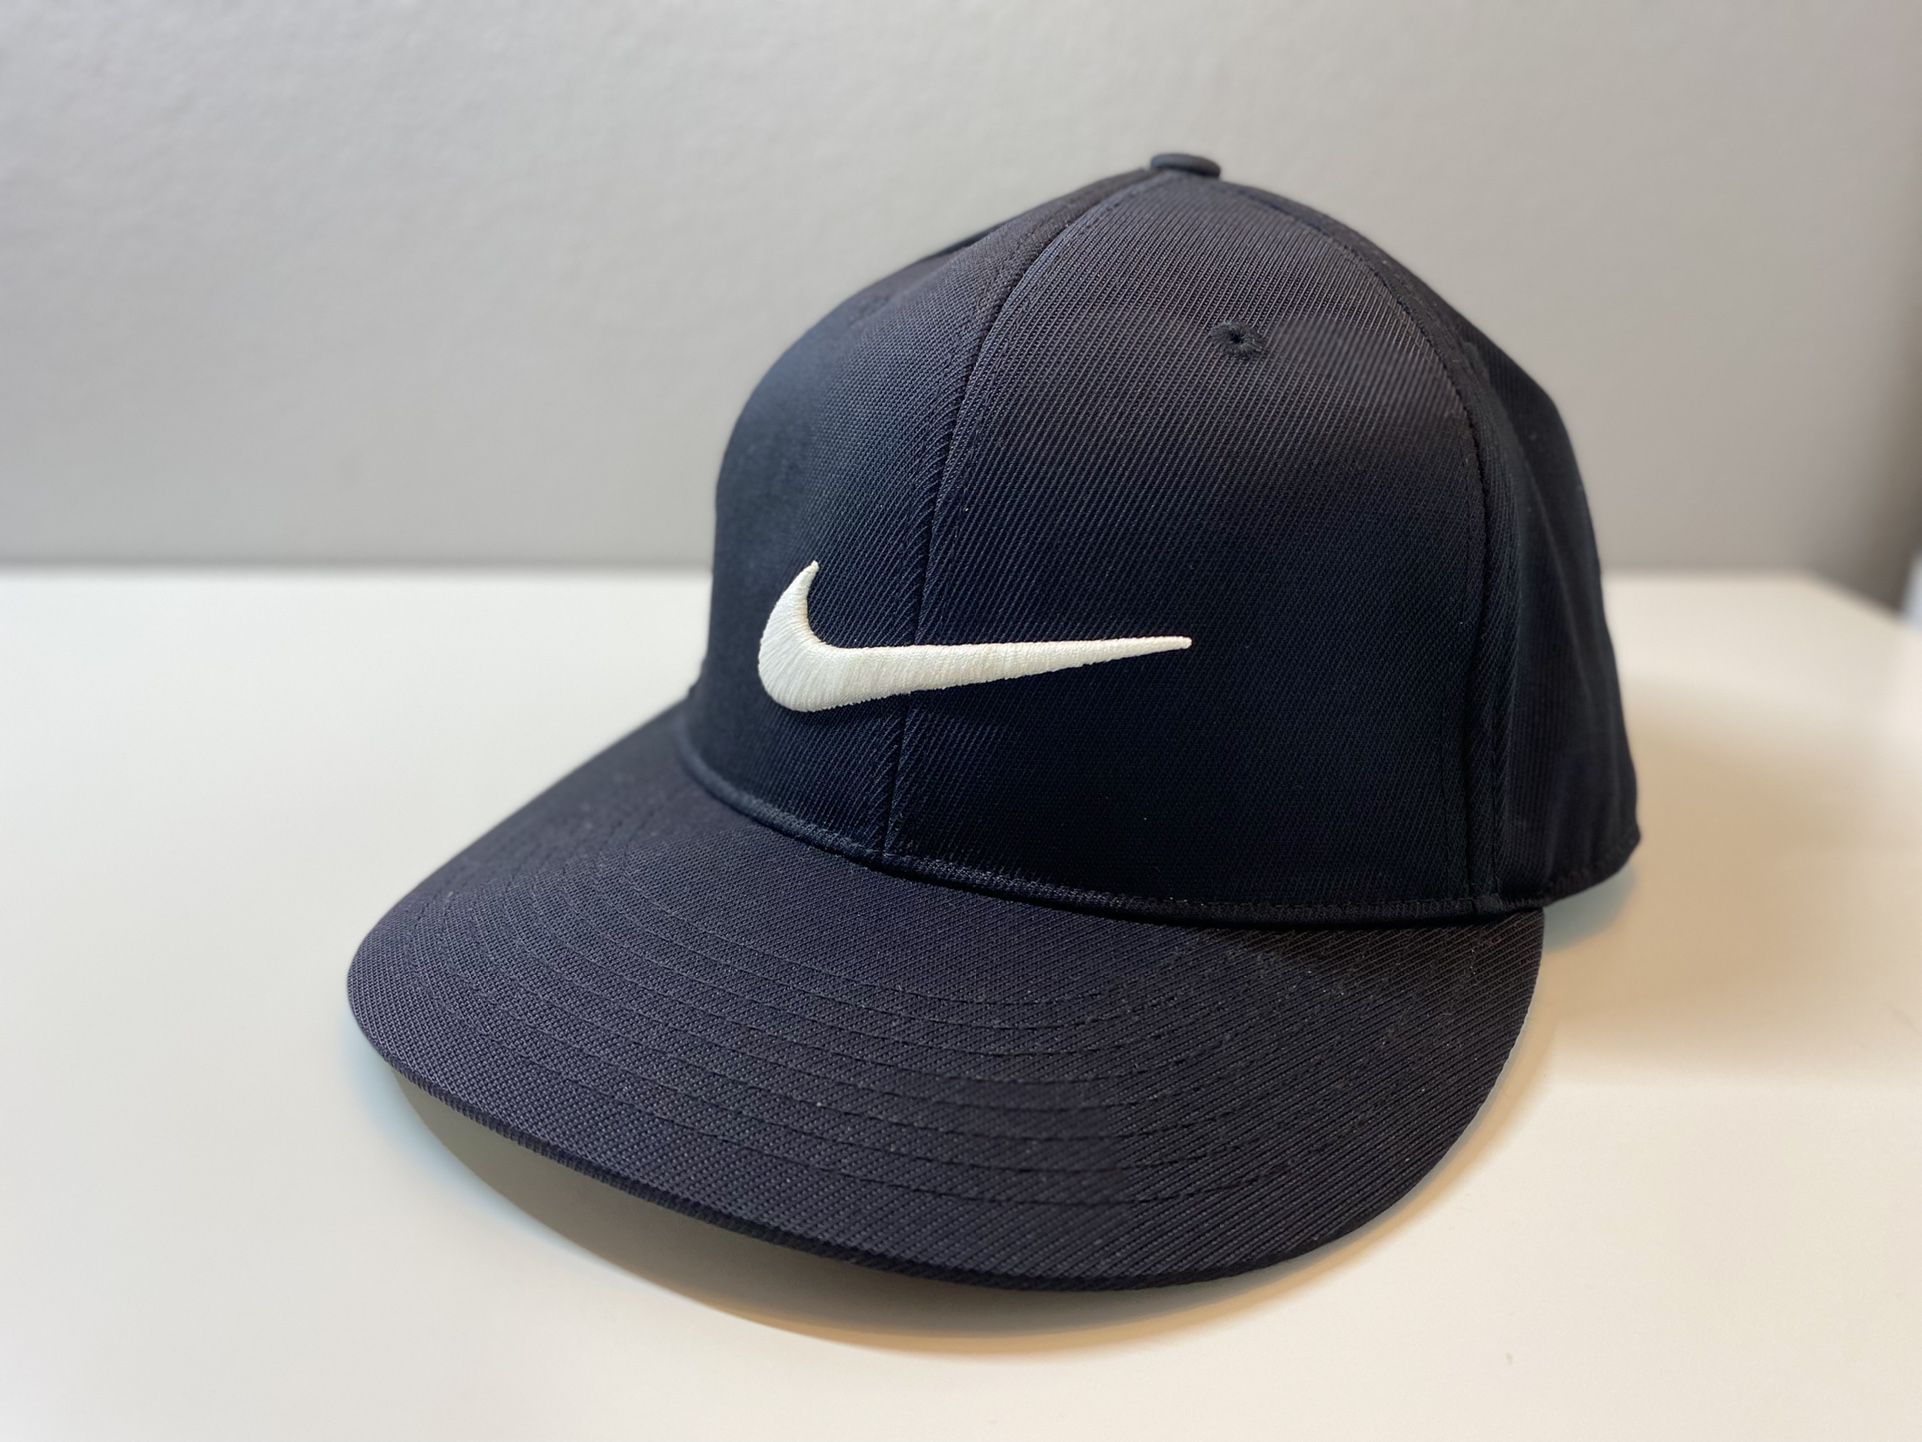 Nike Mens Golf Fitted Hat Black